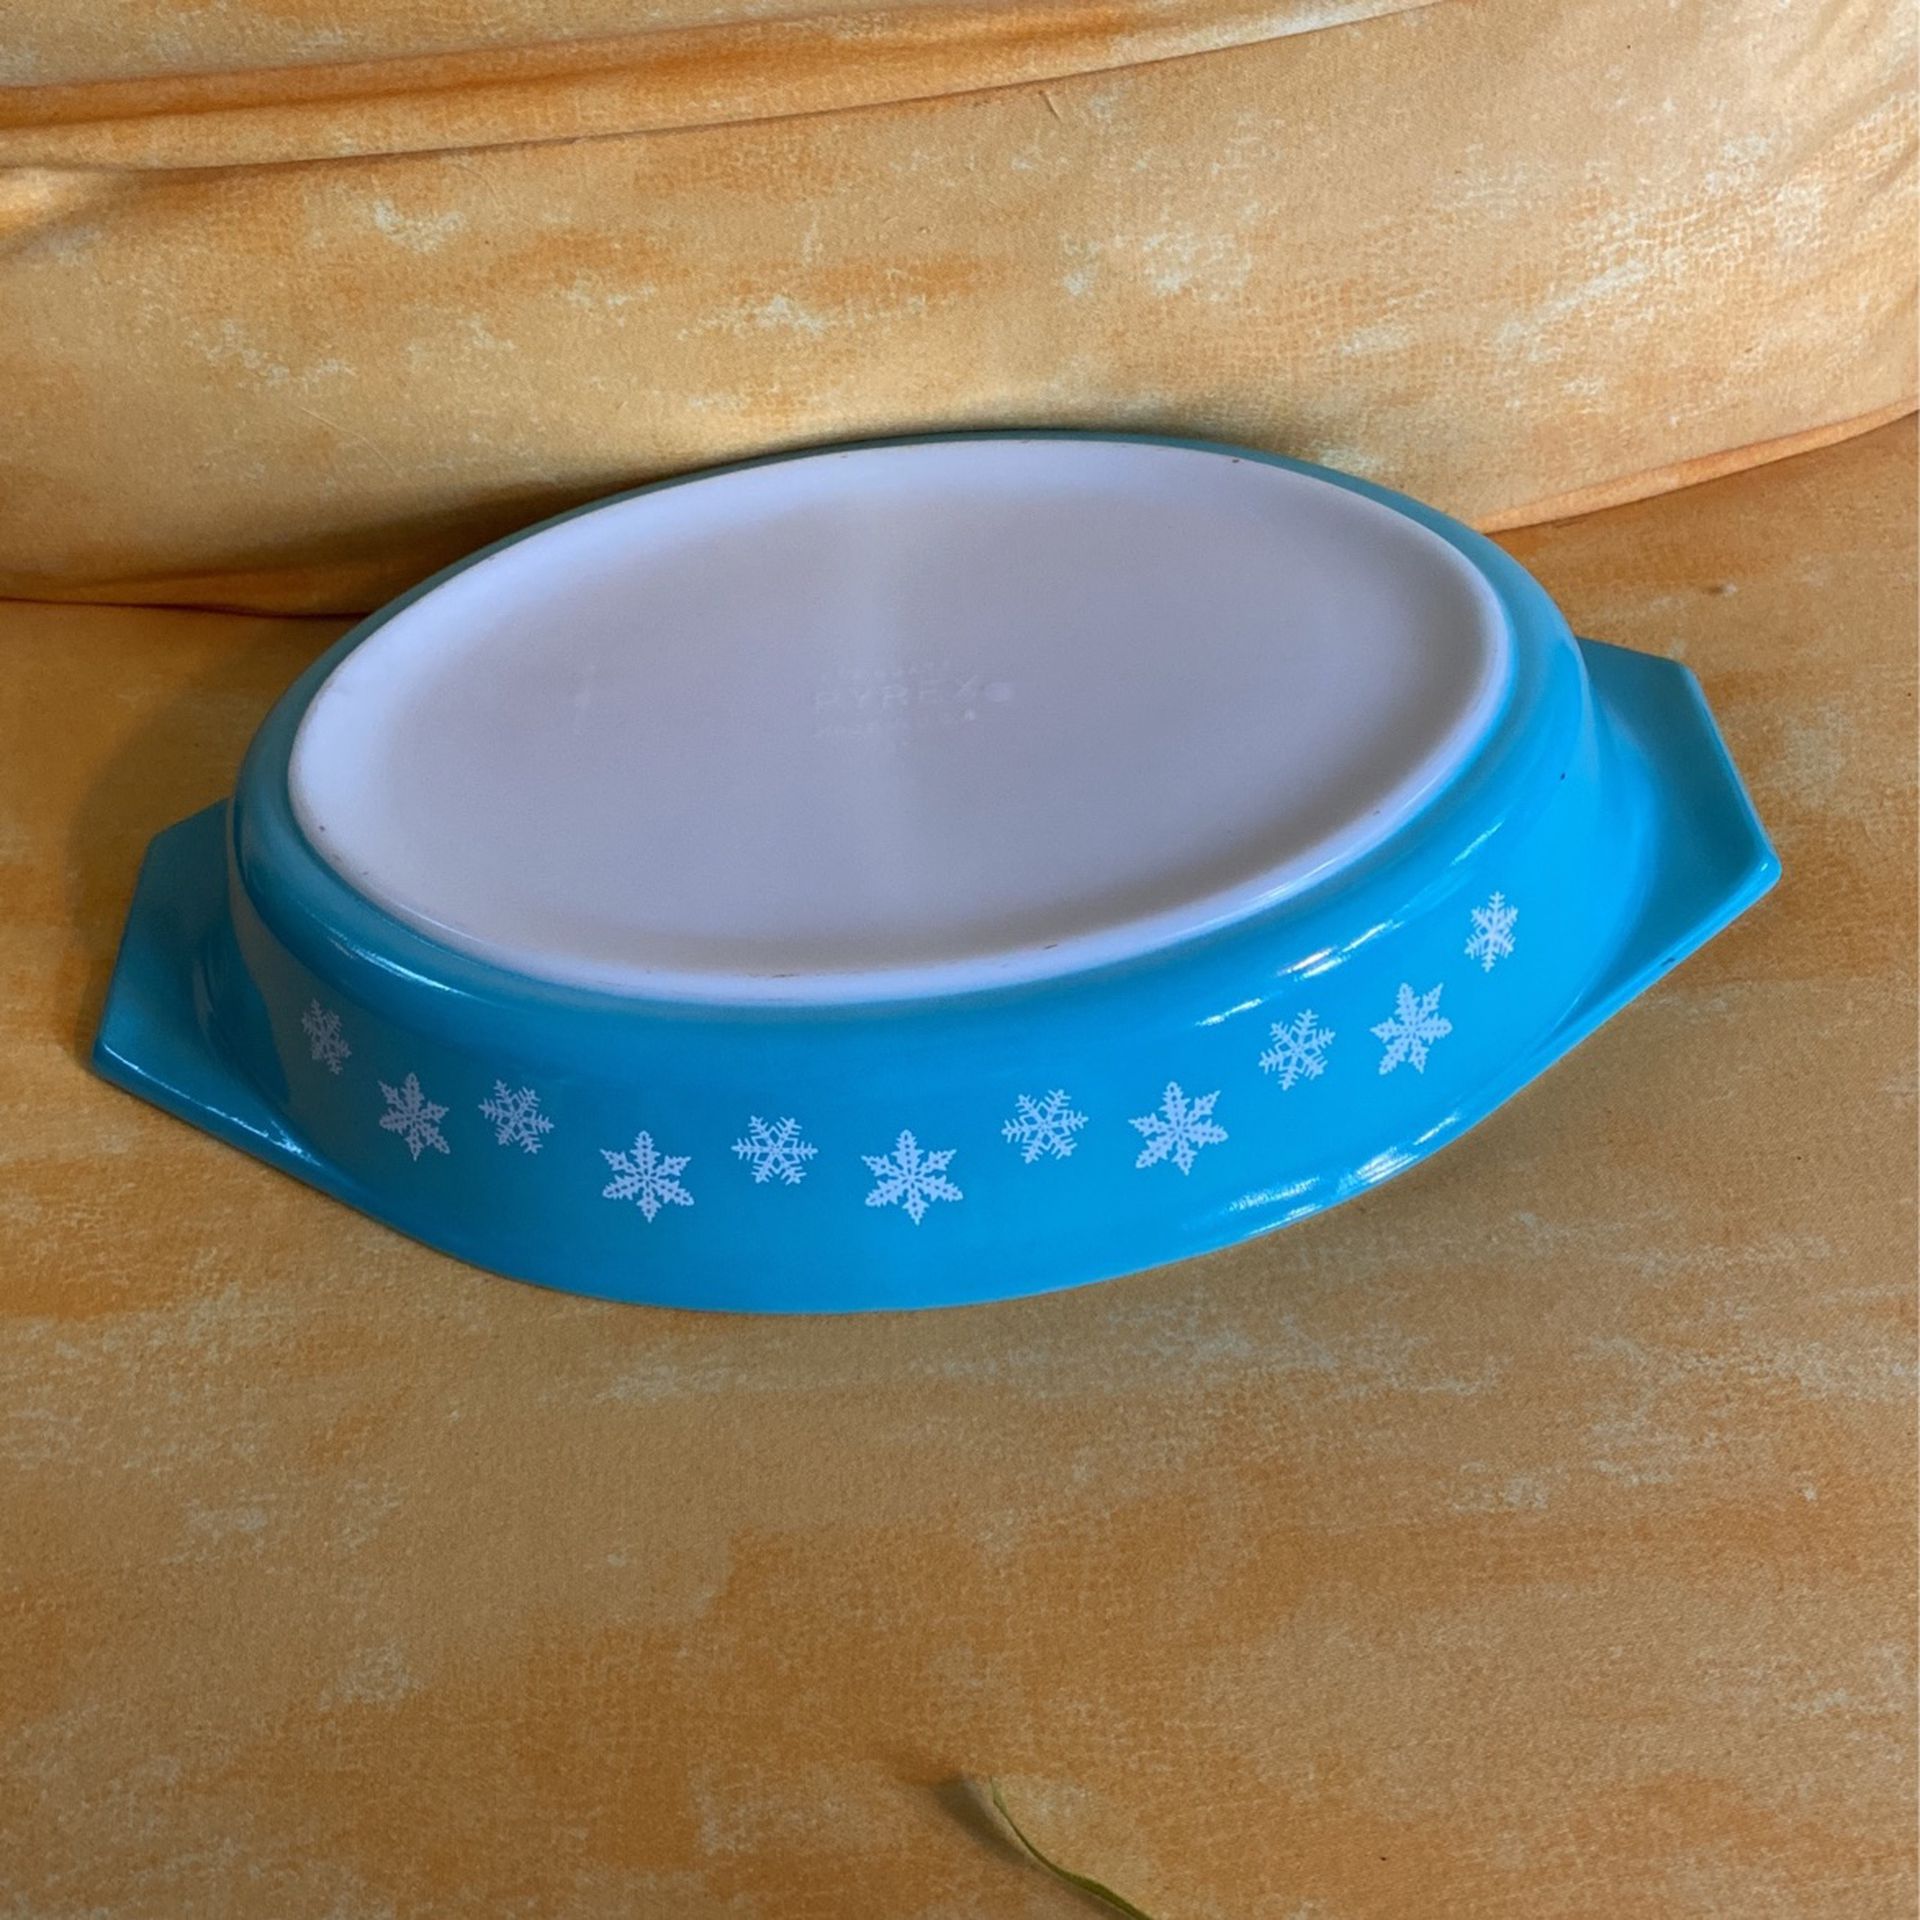 Vintage Pyrex snowflakes oval divided dish